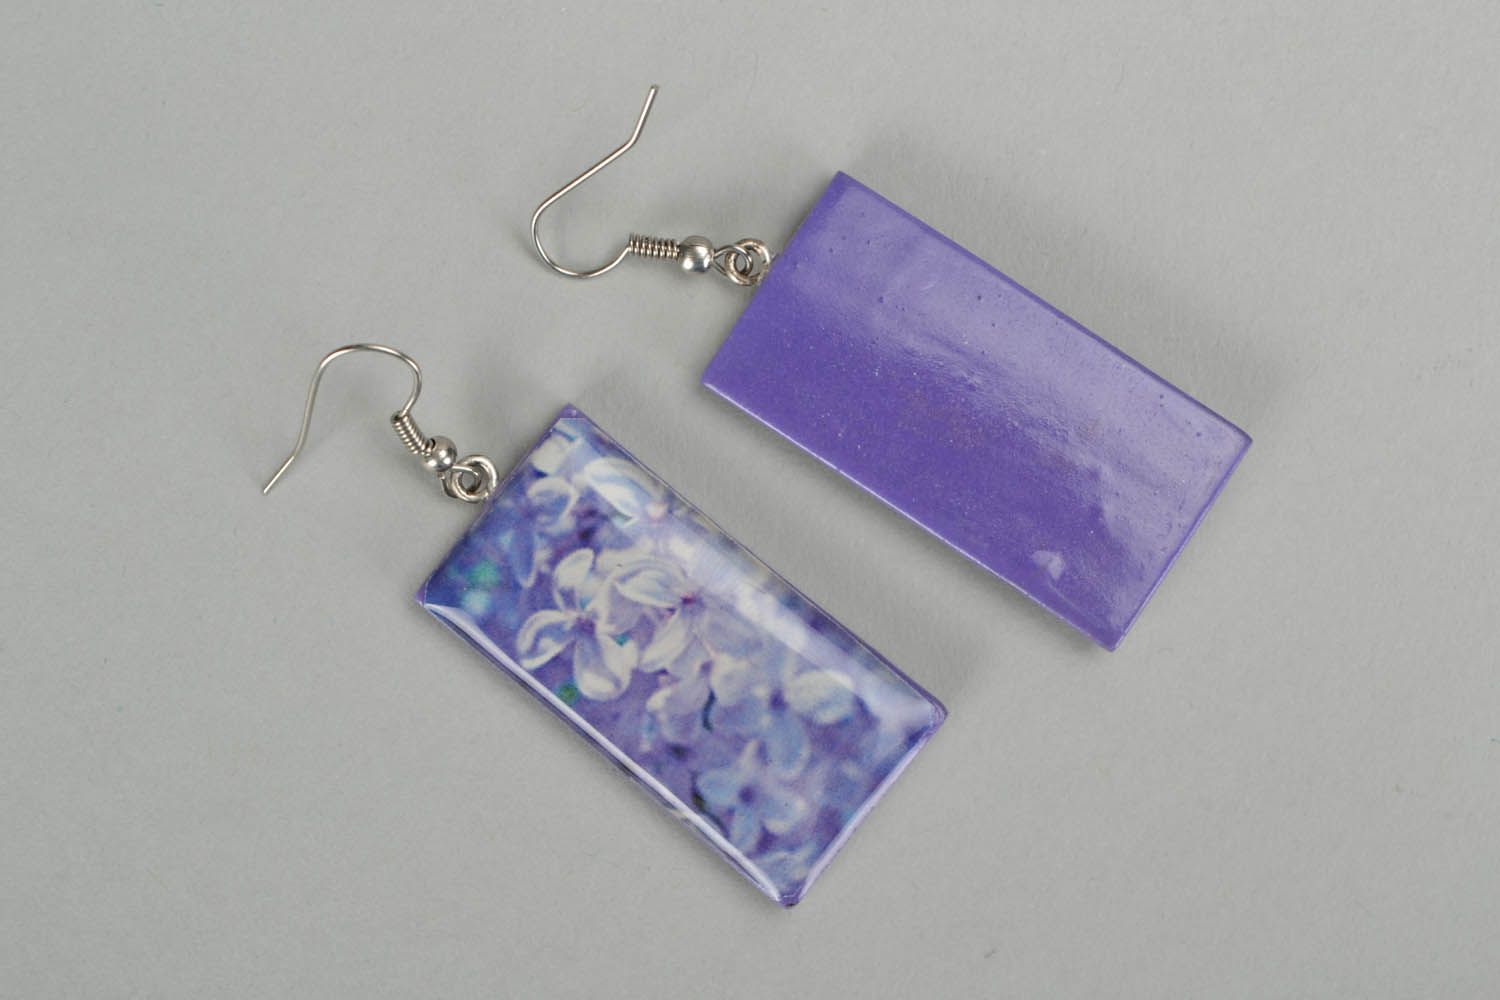 Earrings made of polymer clay and glaze photo 3